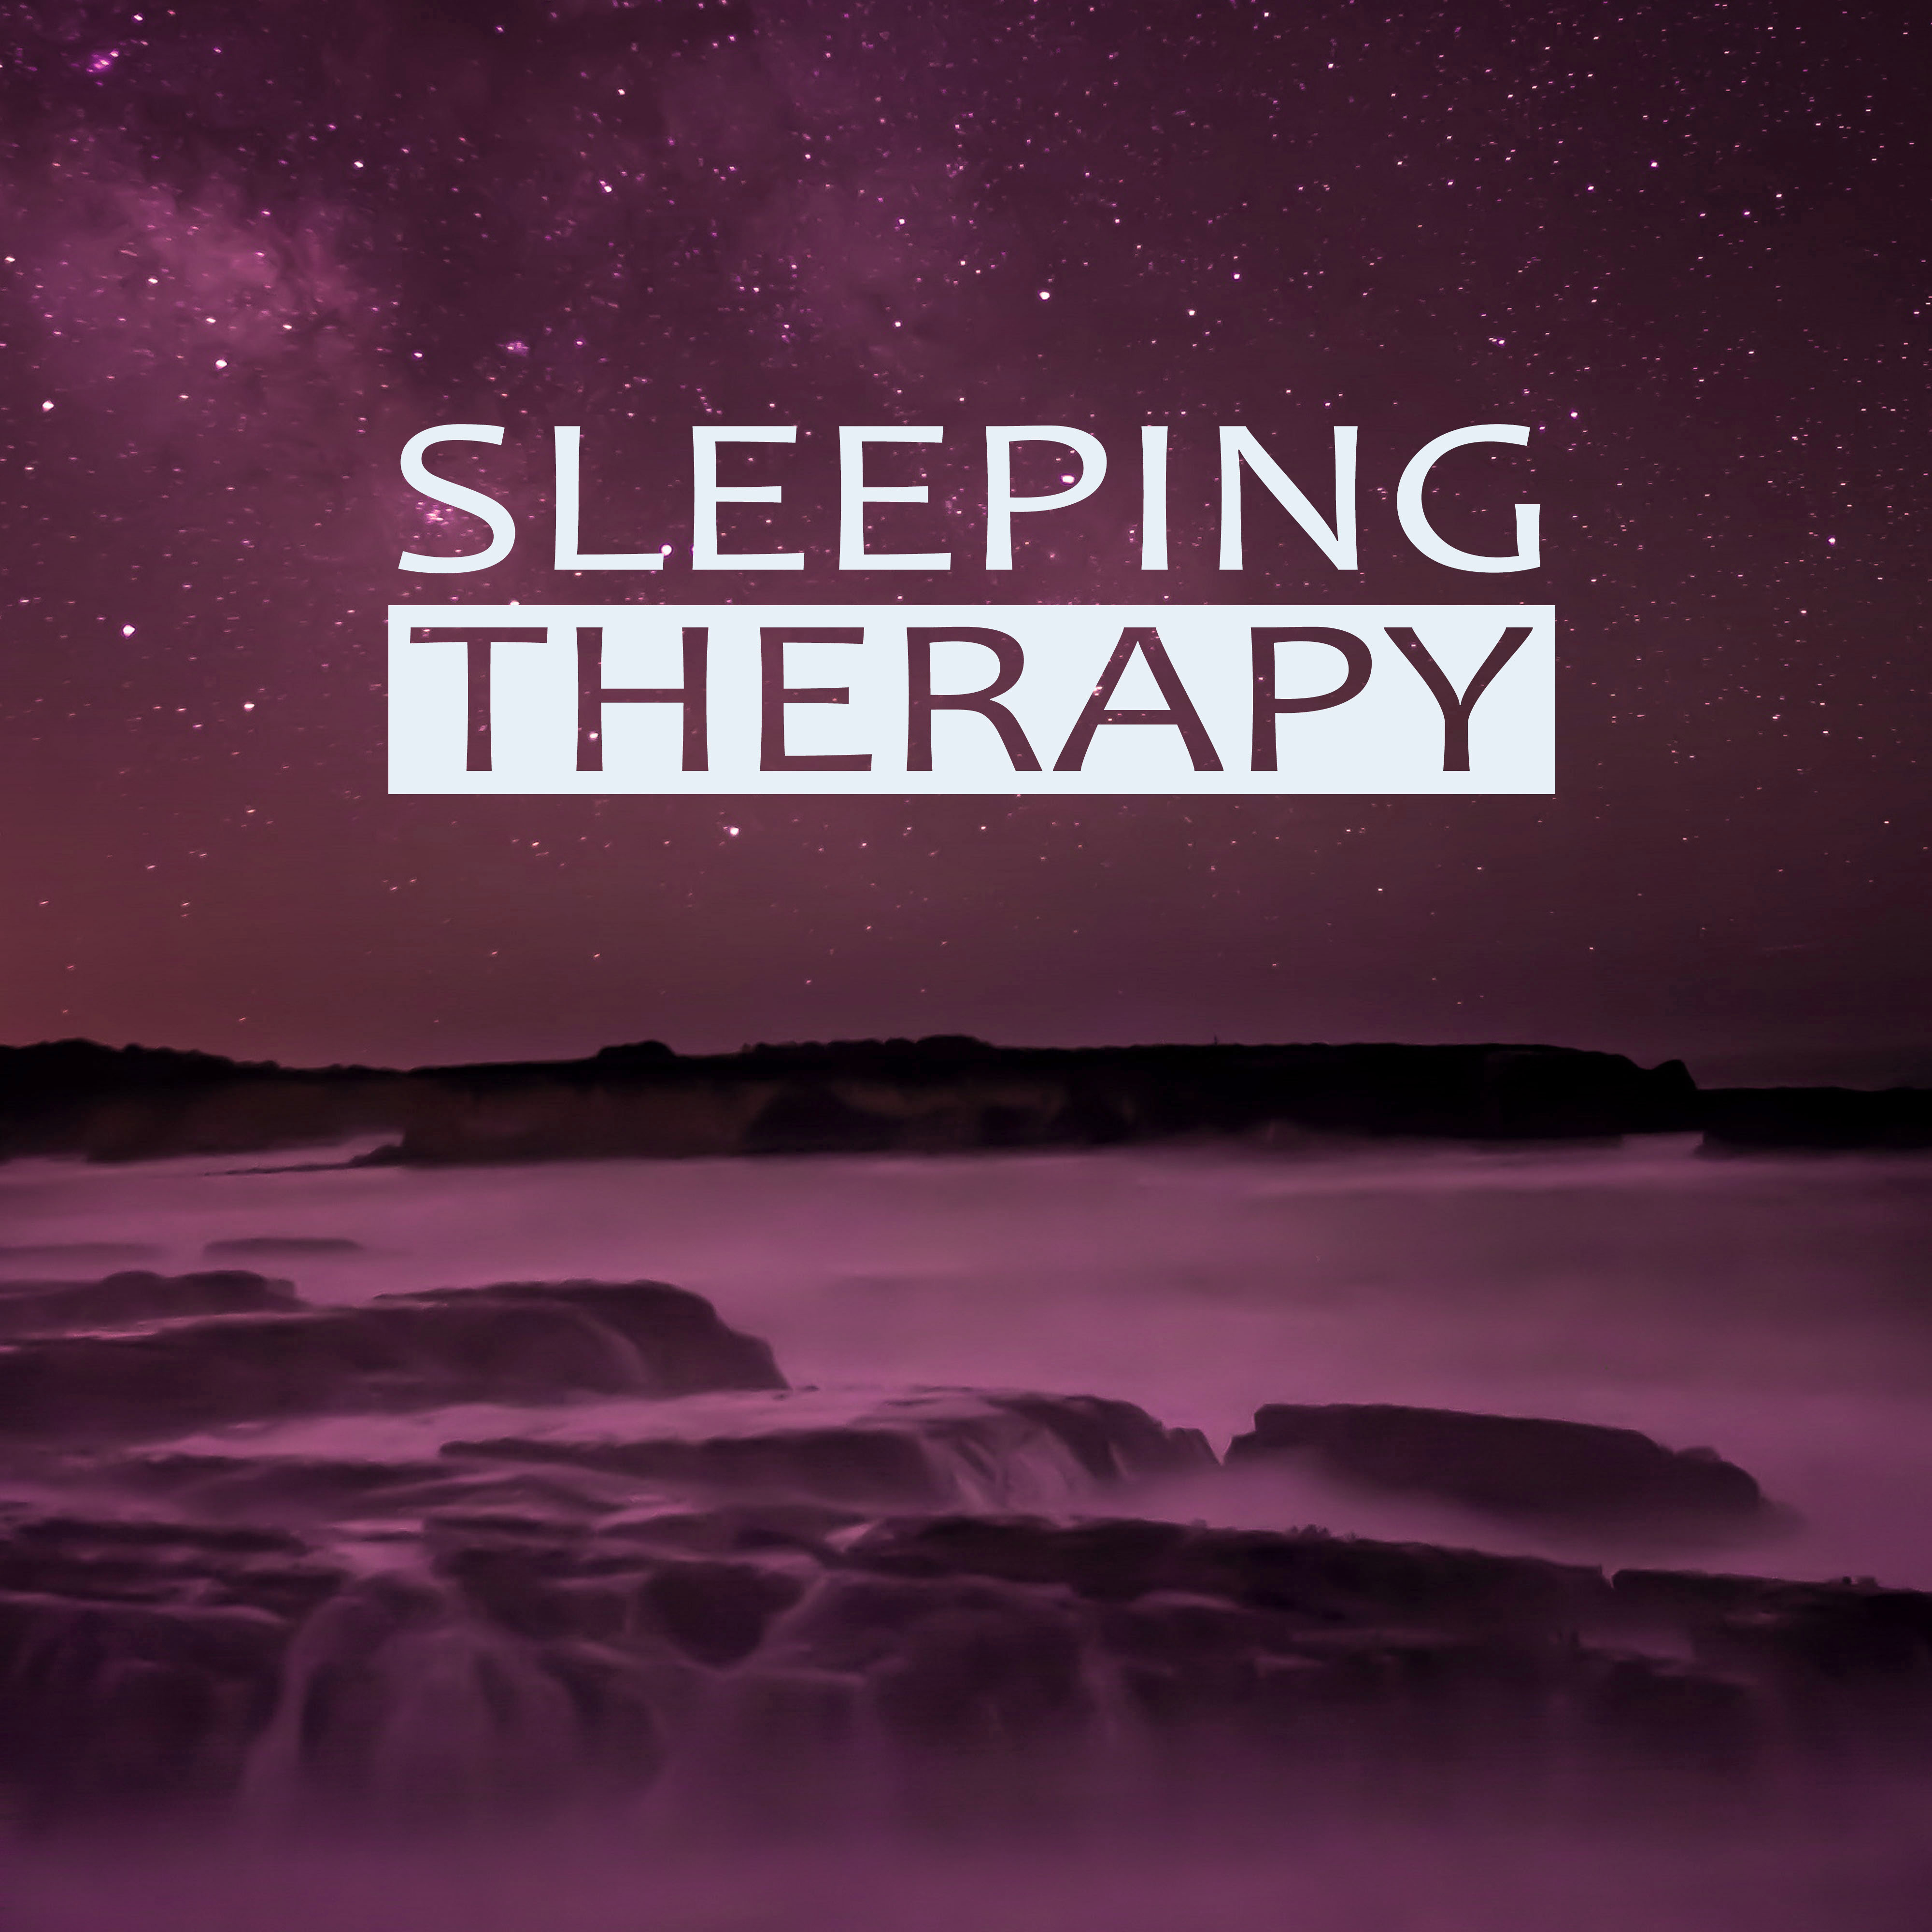 Sleeping Therapy – Music of Nature for Deep Sleep, Relax, Fall Asleep Easily, Rain Sounds, Calm Music for Ralexation, Pure Dream, New Age, Serenity Dream